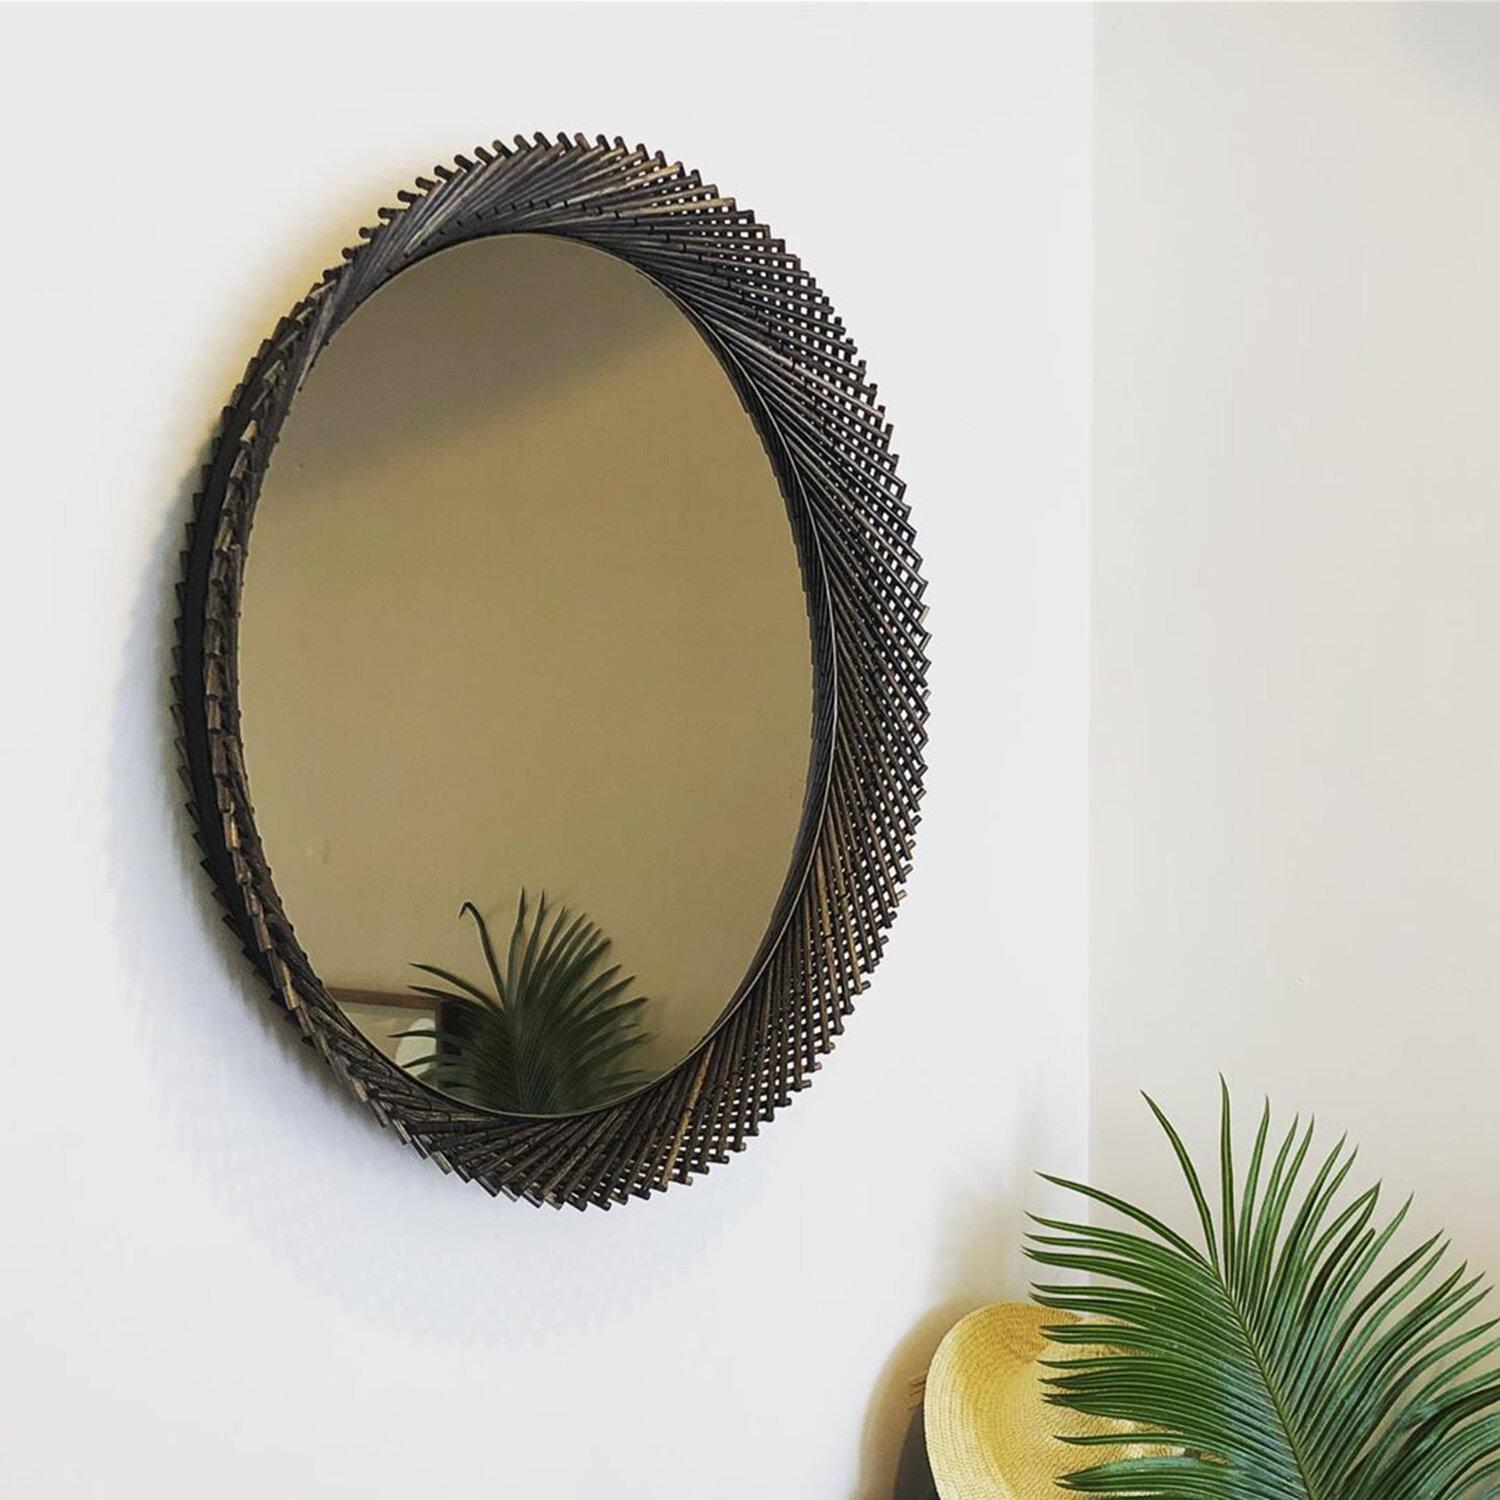 Mooda Round Mirror 30 / Oxidized Maple Wood, Clear Mirror by INDO- For Sale 5